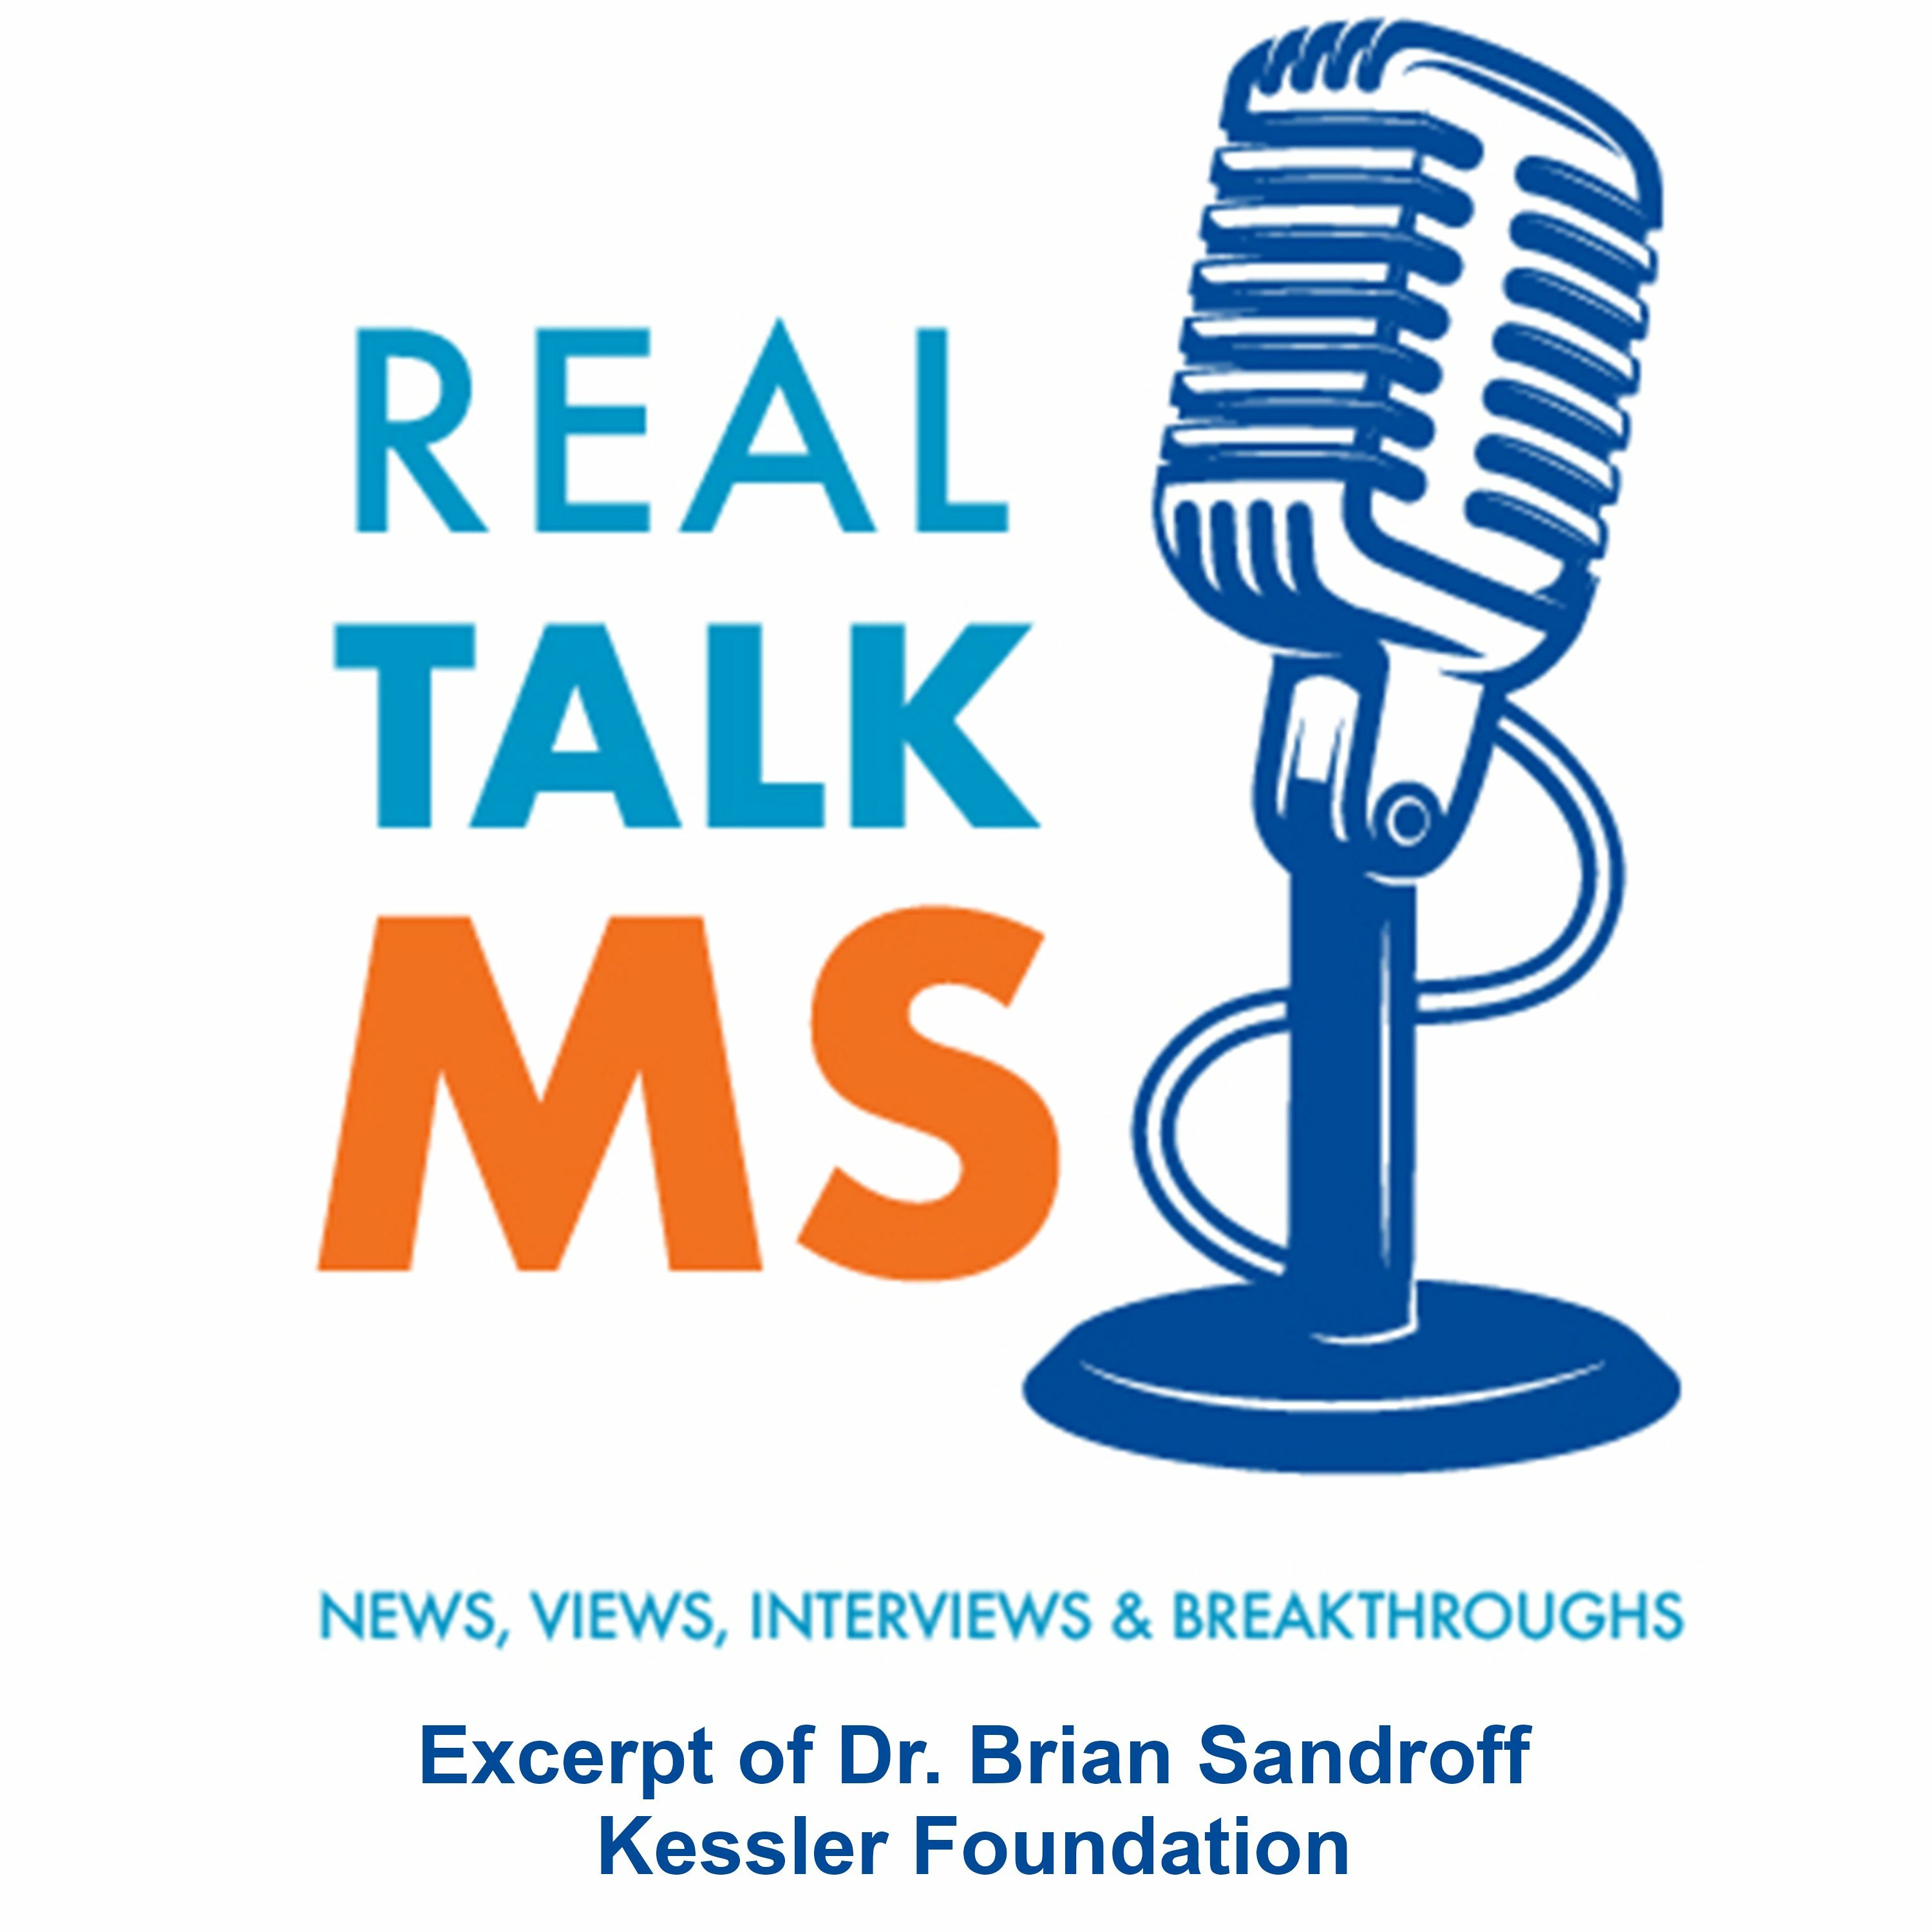 REAL TALKS MS-Dr. Brian Sandroff on improving cognition and mobility impairment through exercise